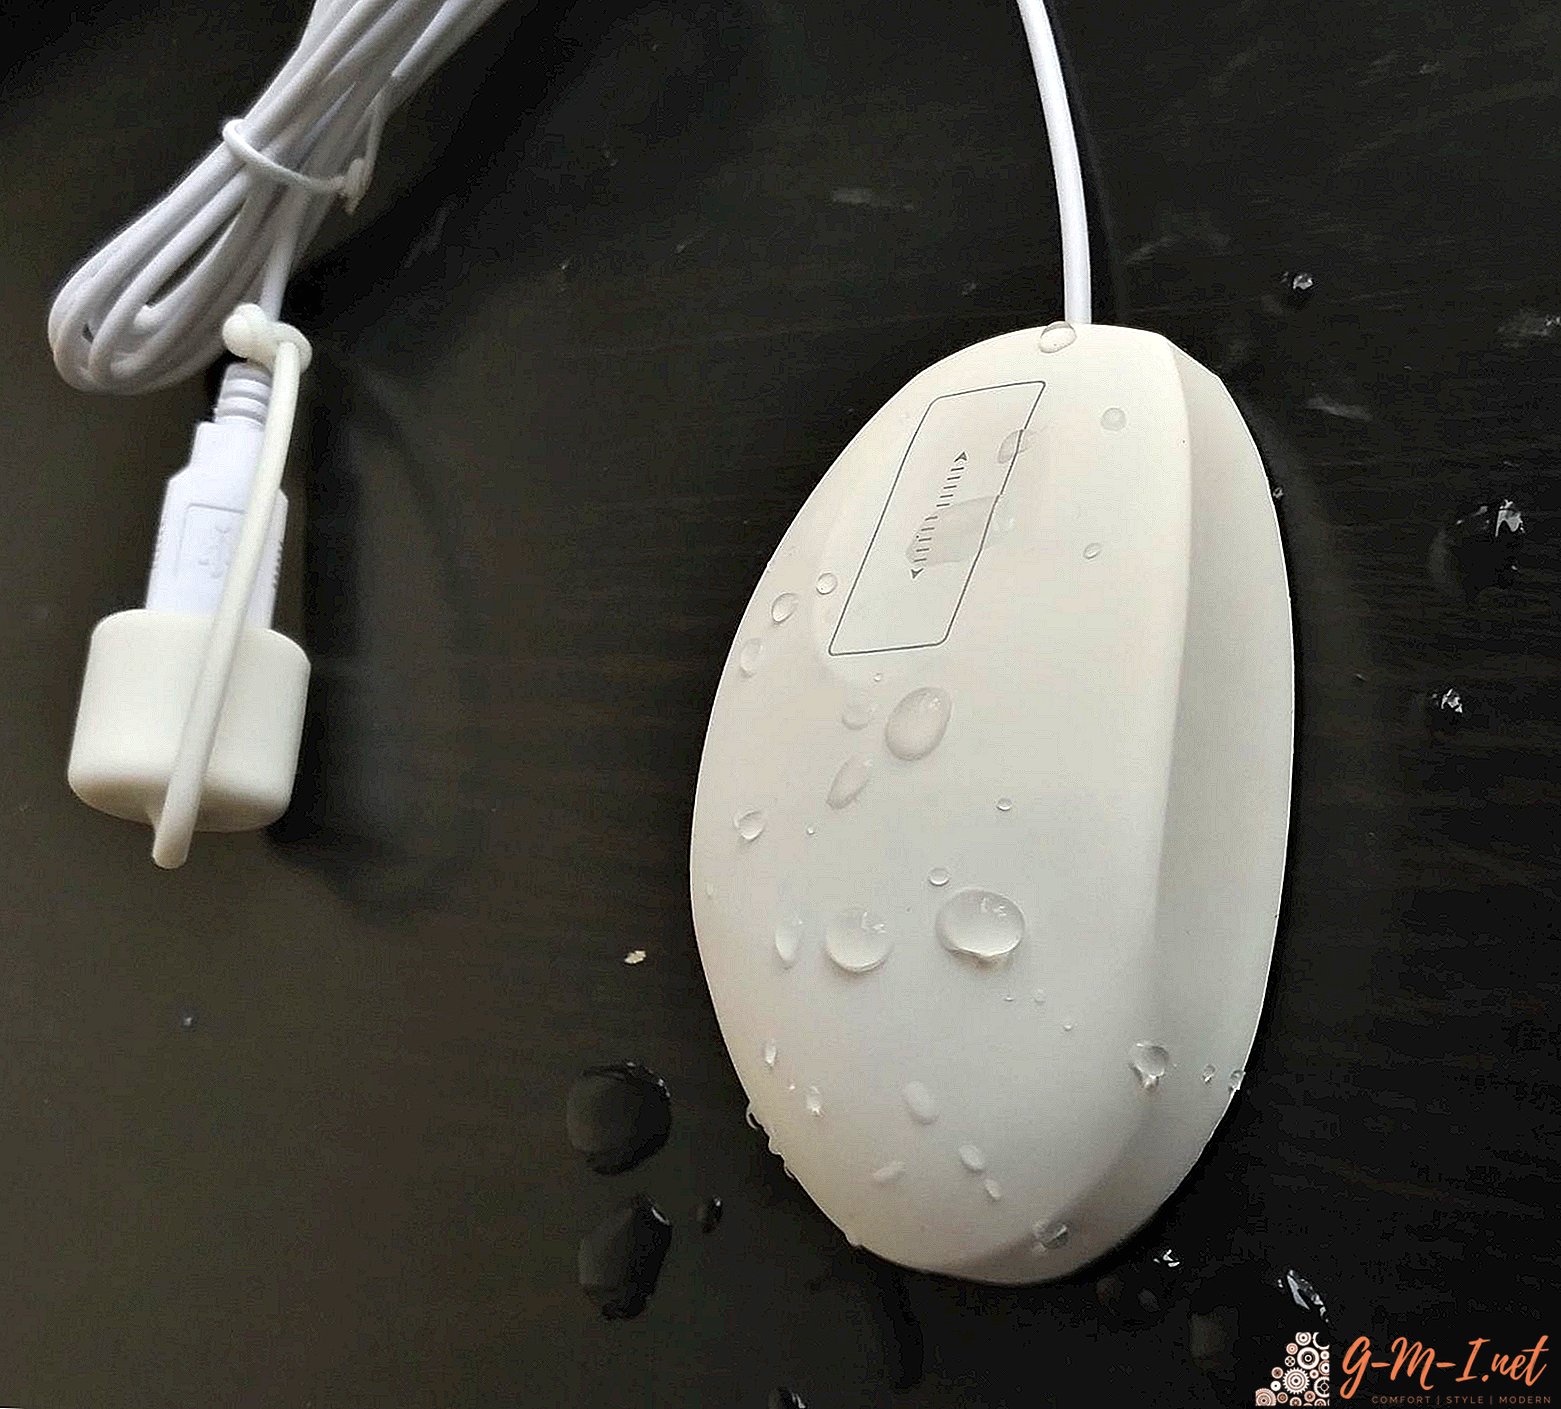 How to clean a mouse